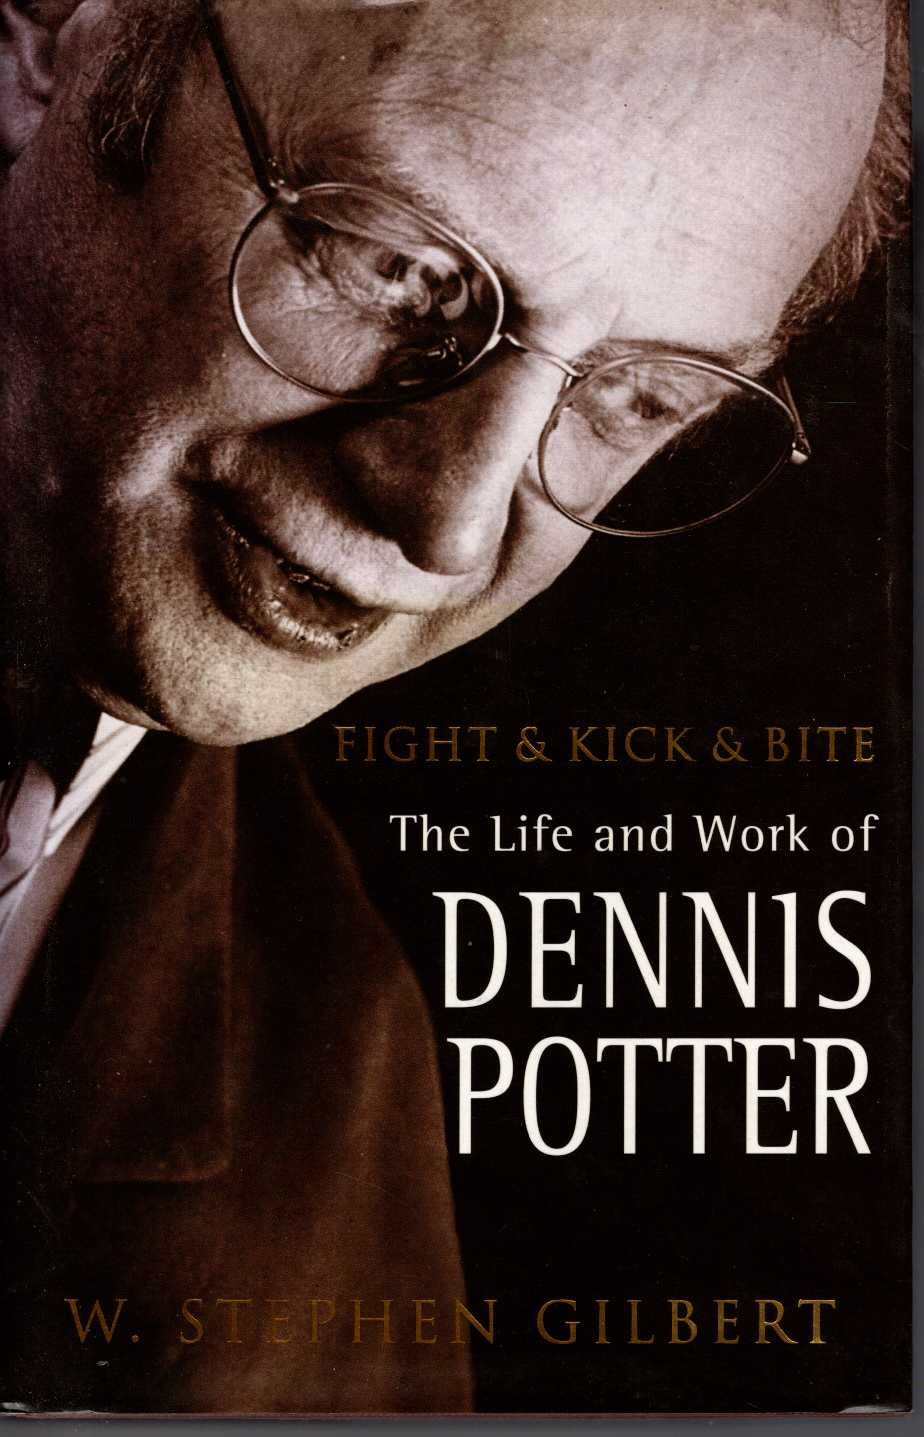 FIGHT & KICK & BITE: THE LIFE AND WORKS OF DENNIS POTTER front book cover image